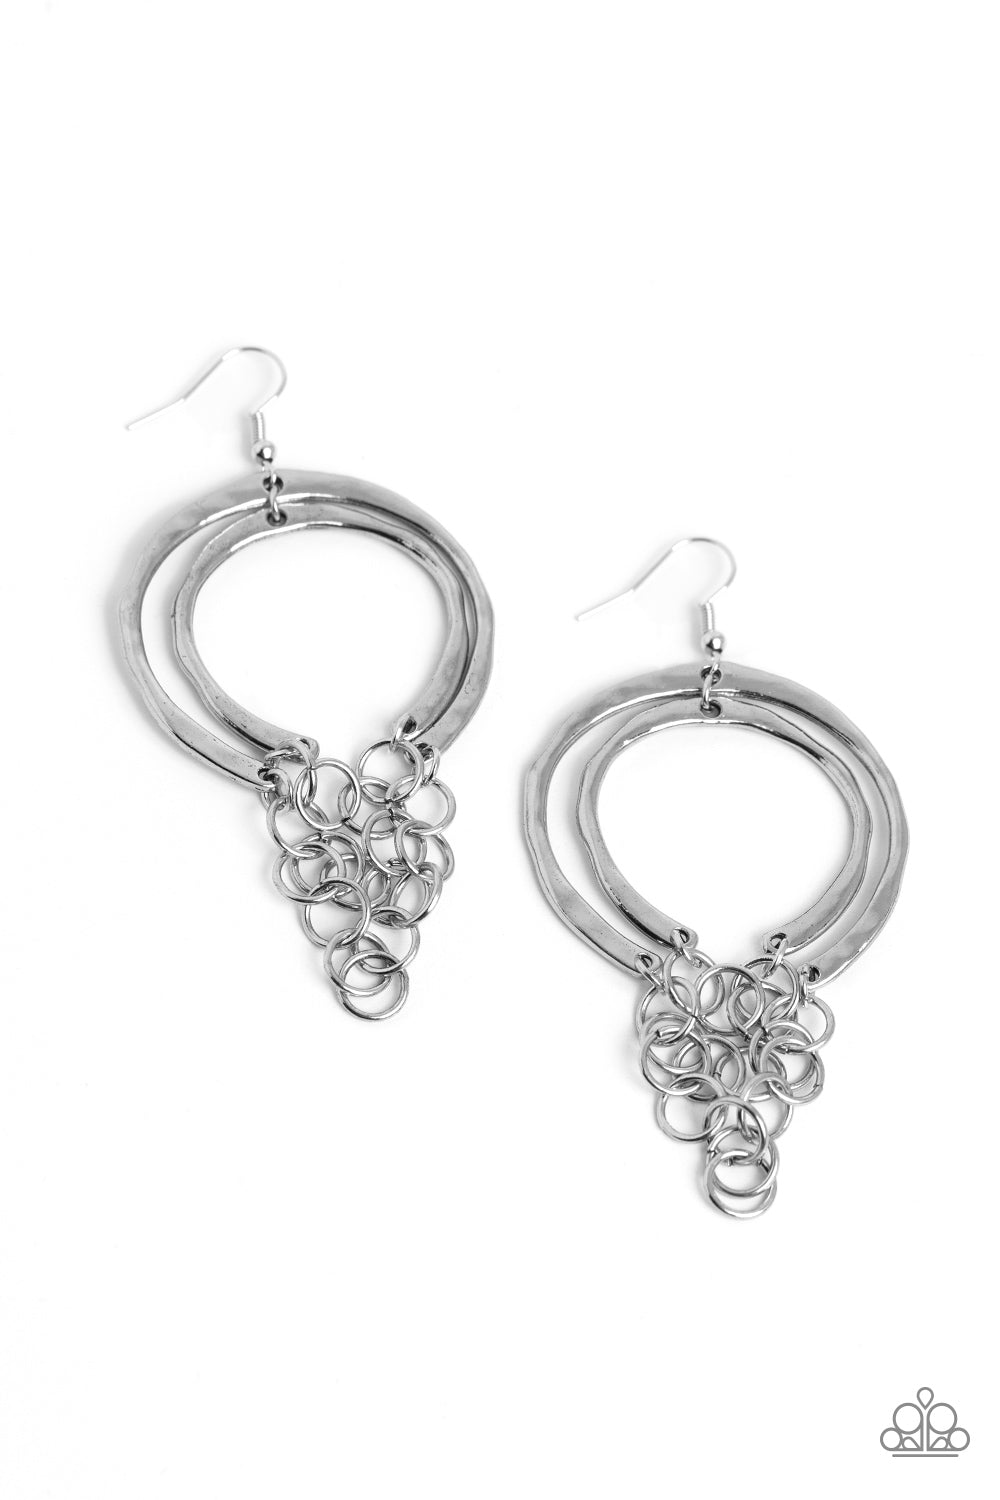 Dont Go CHAINg-ing - Silver Hammered Rings/Interlocking Dainty Loop Chain Paparazzi Earrings